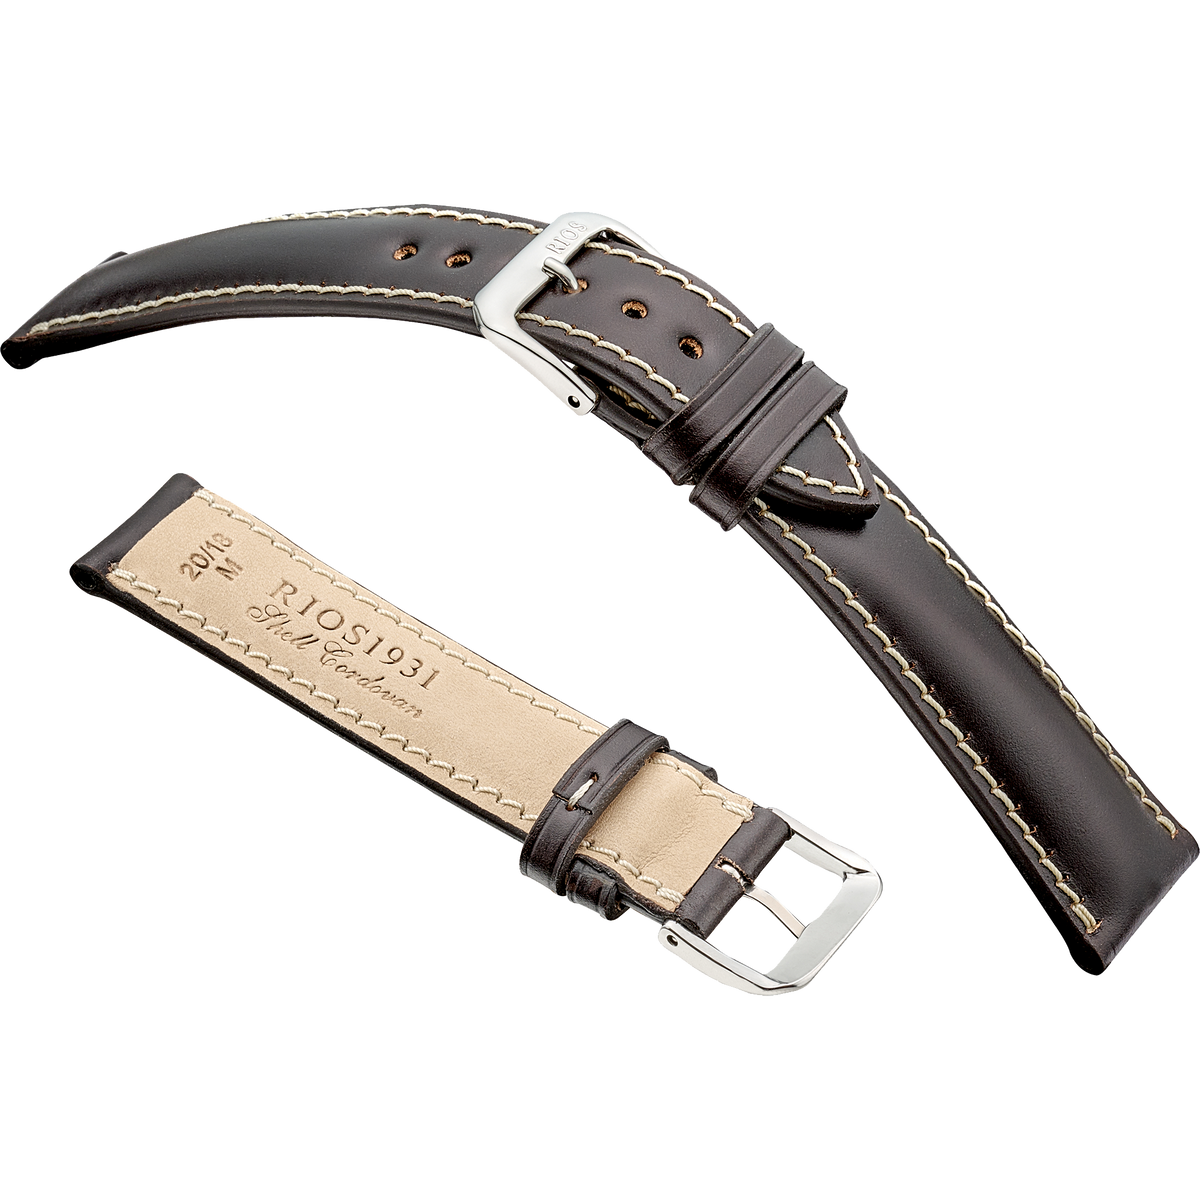 Rios 1931 Watch Bands - New York - Genuine Shell Cordovan Leather